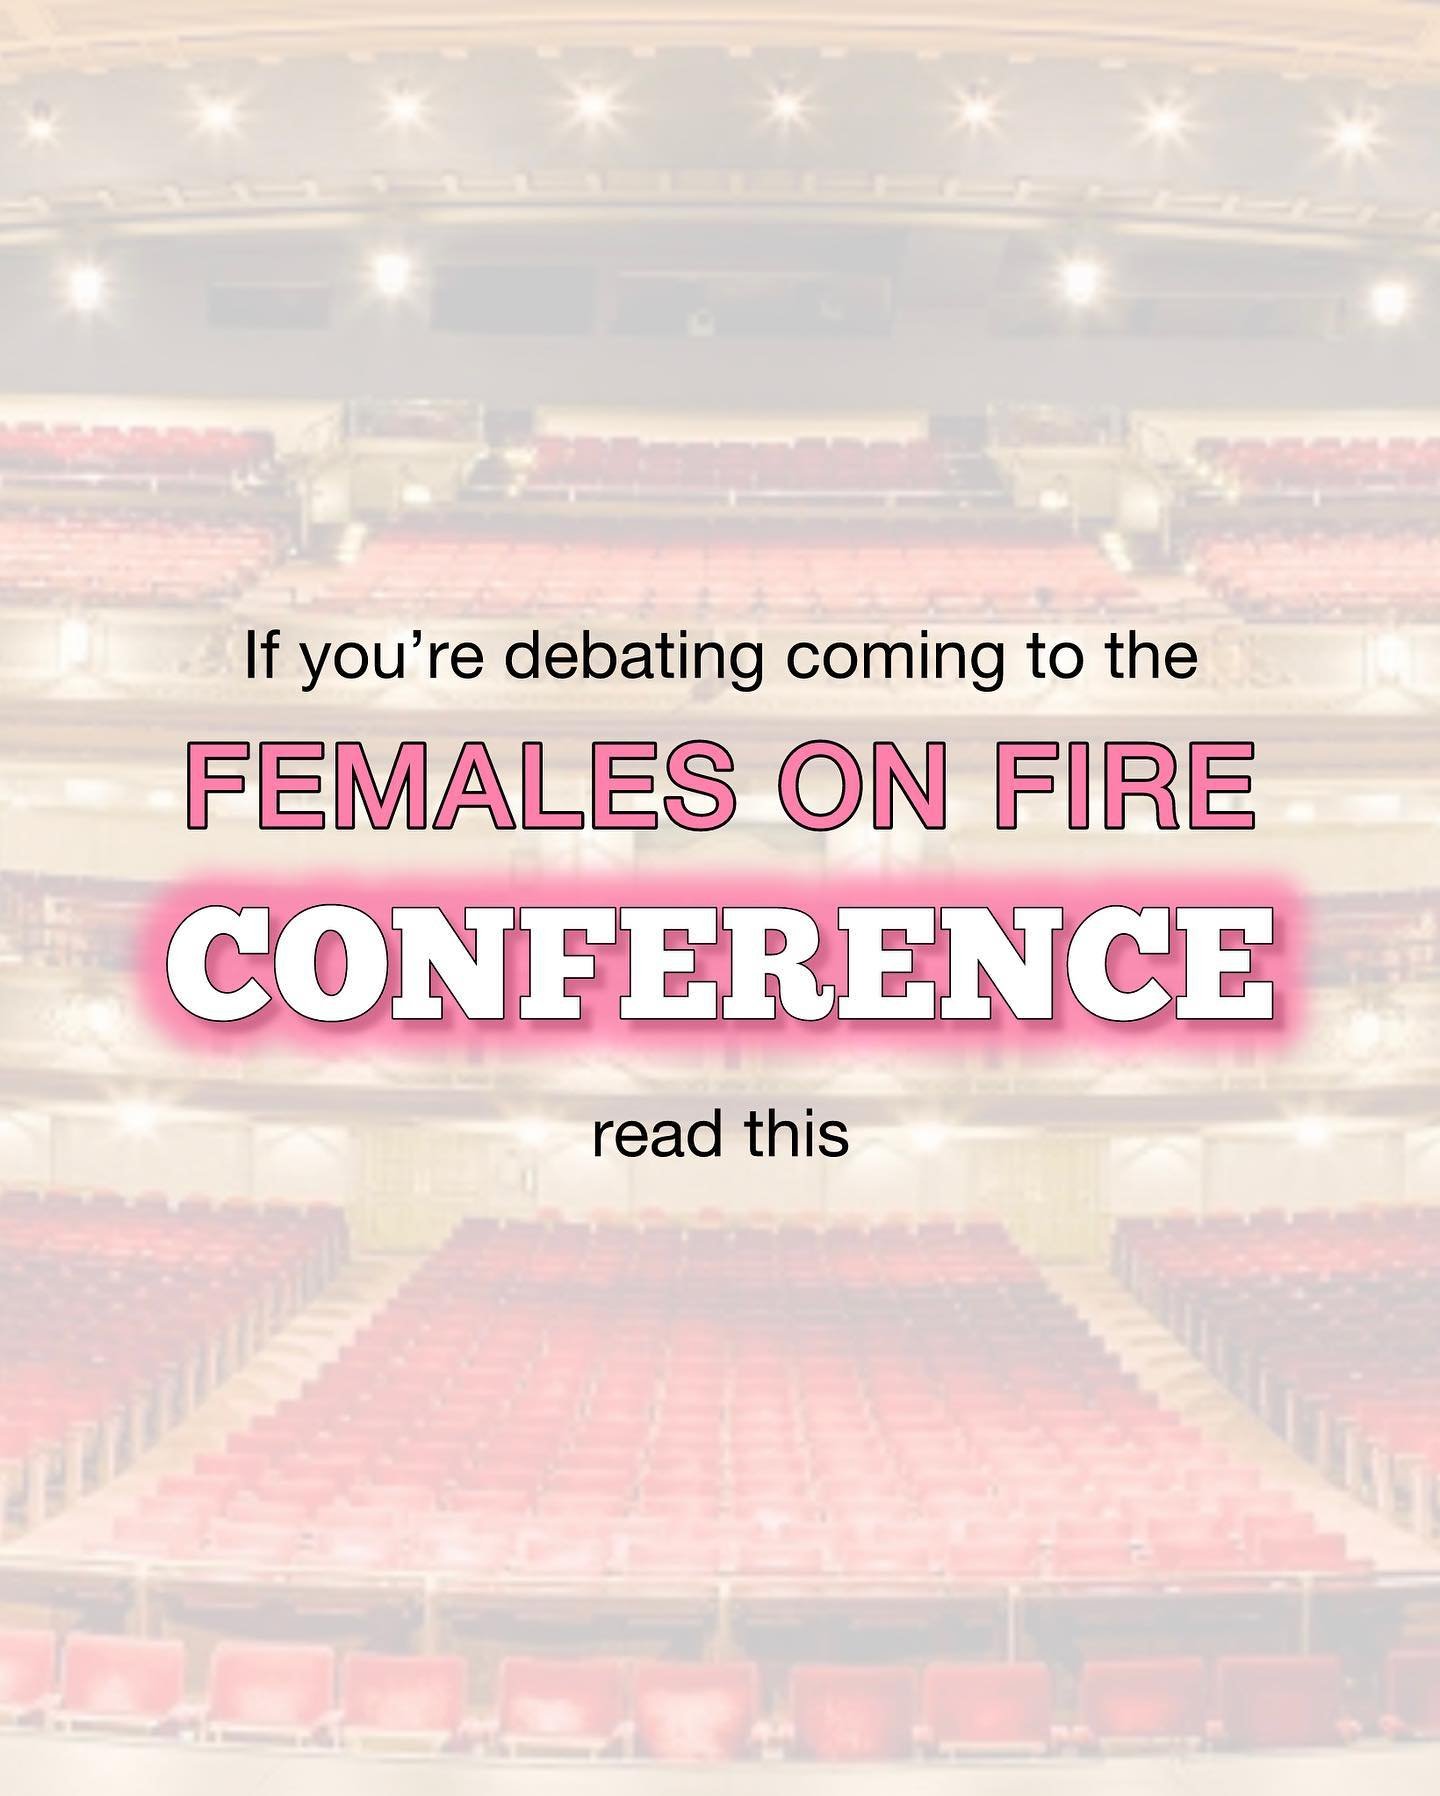 Swipe to read 👉🏻

If you&rsquo;ve debated grabbing your ticket and joining us for the Females on Fire Conference, we hope this will help you decide that this room is for you.

If you&rsquo;ve ever felt the pressures of life and business, felt left 